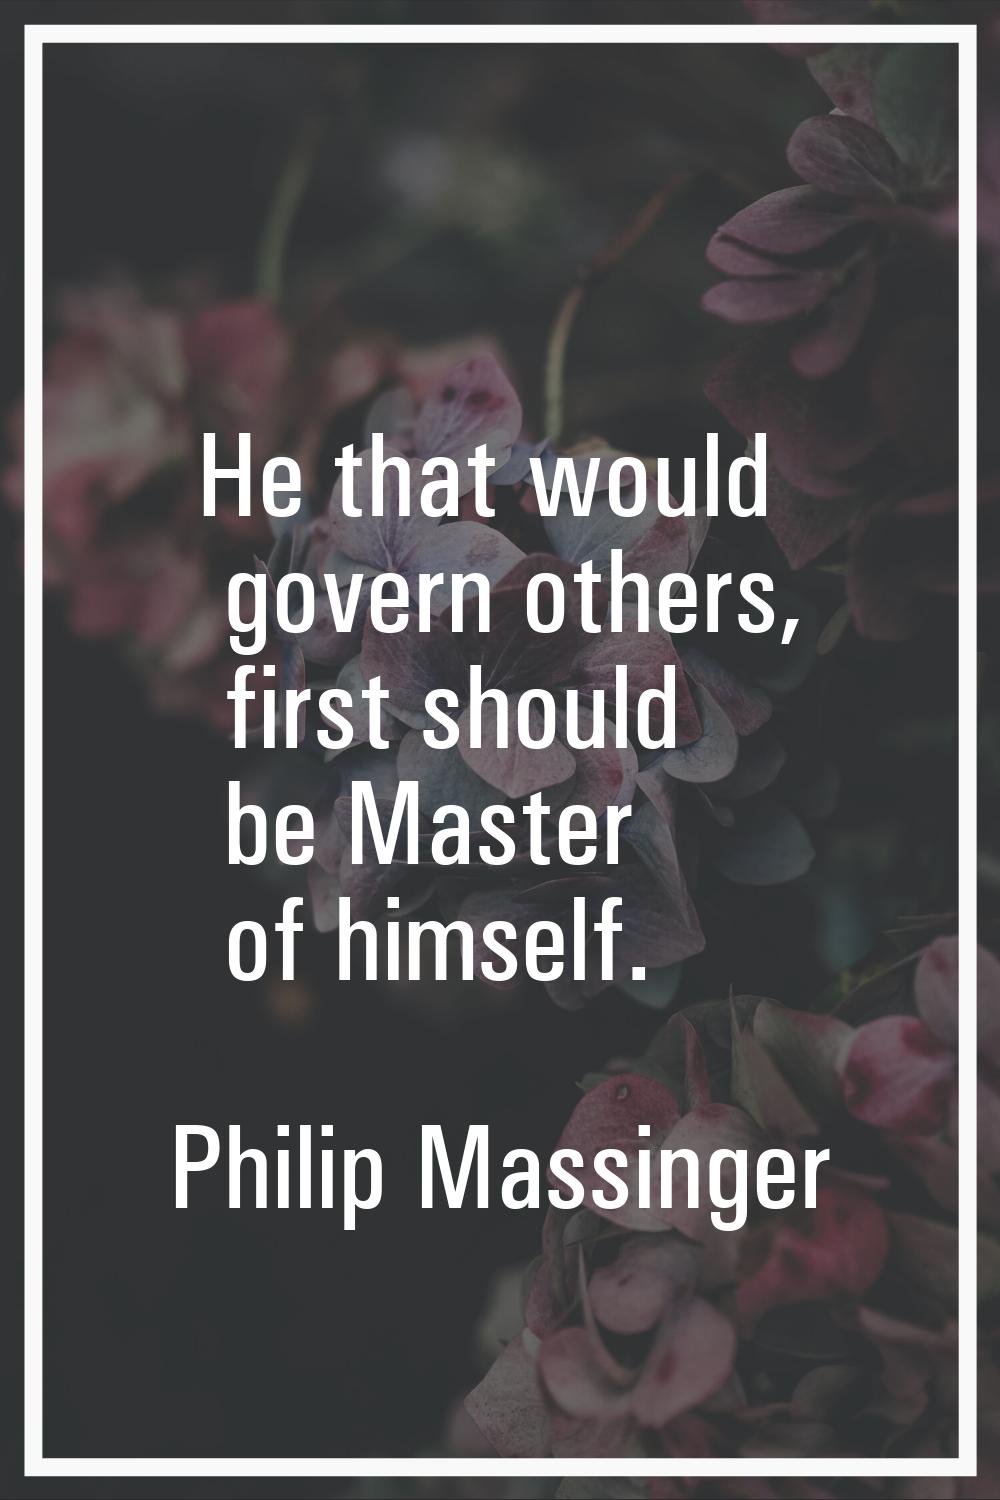 He that would govern others, first should be Master of himself.